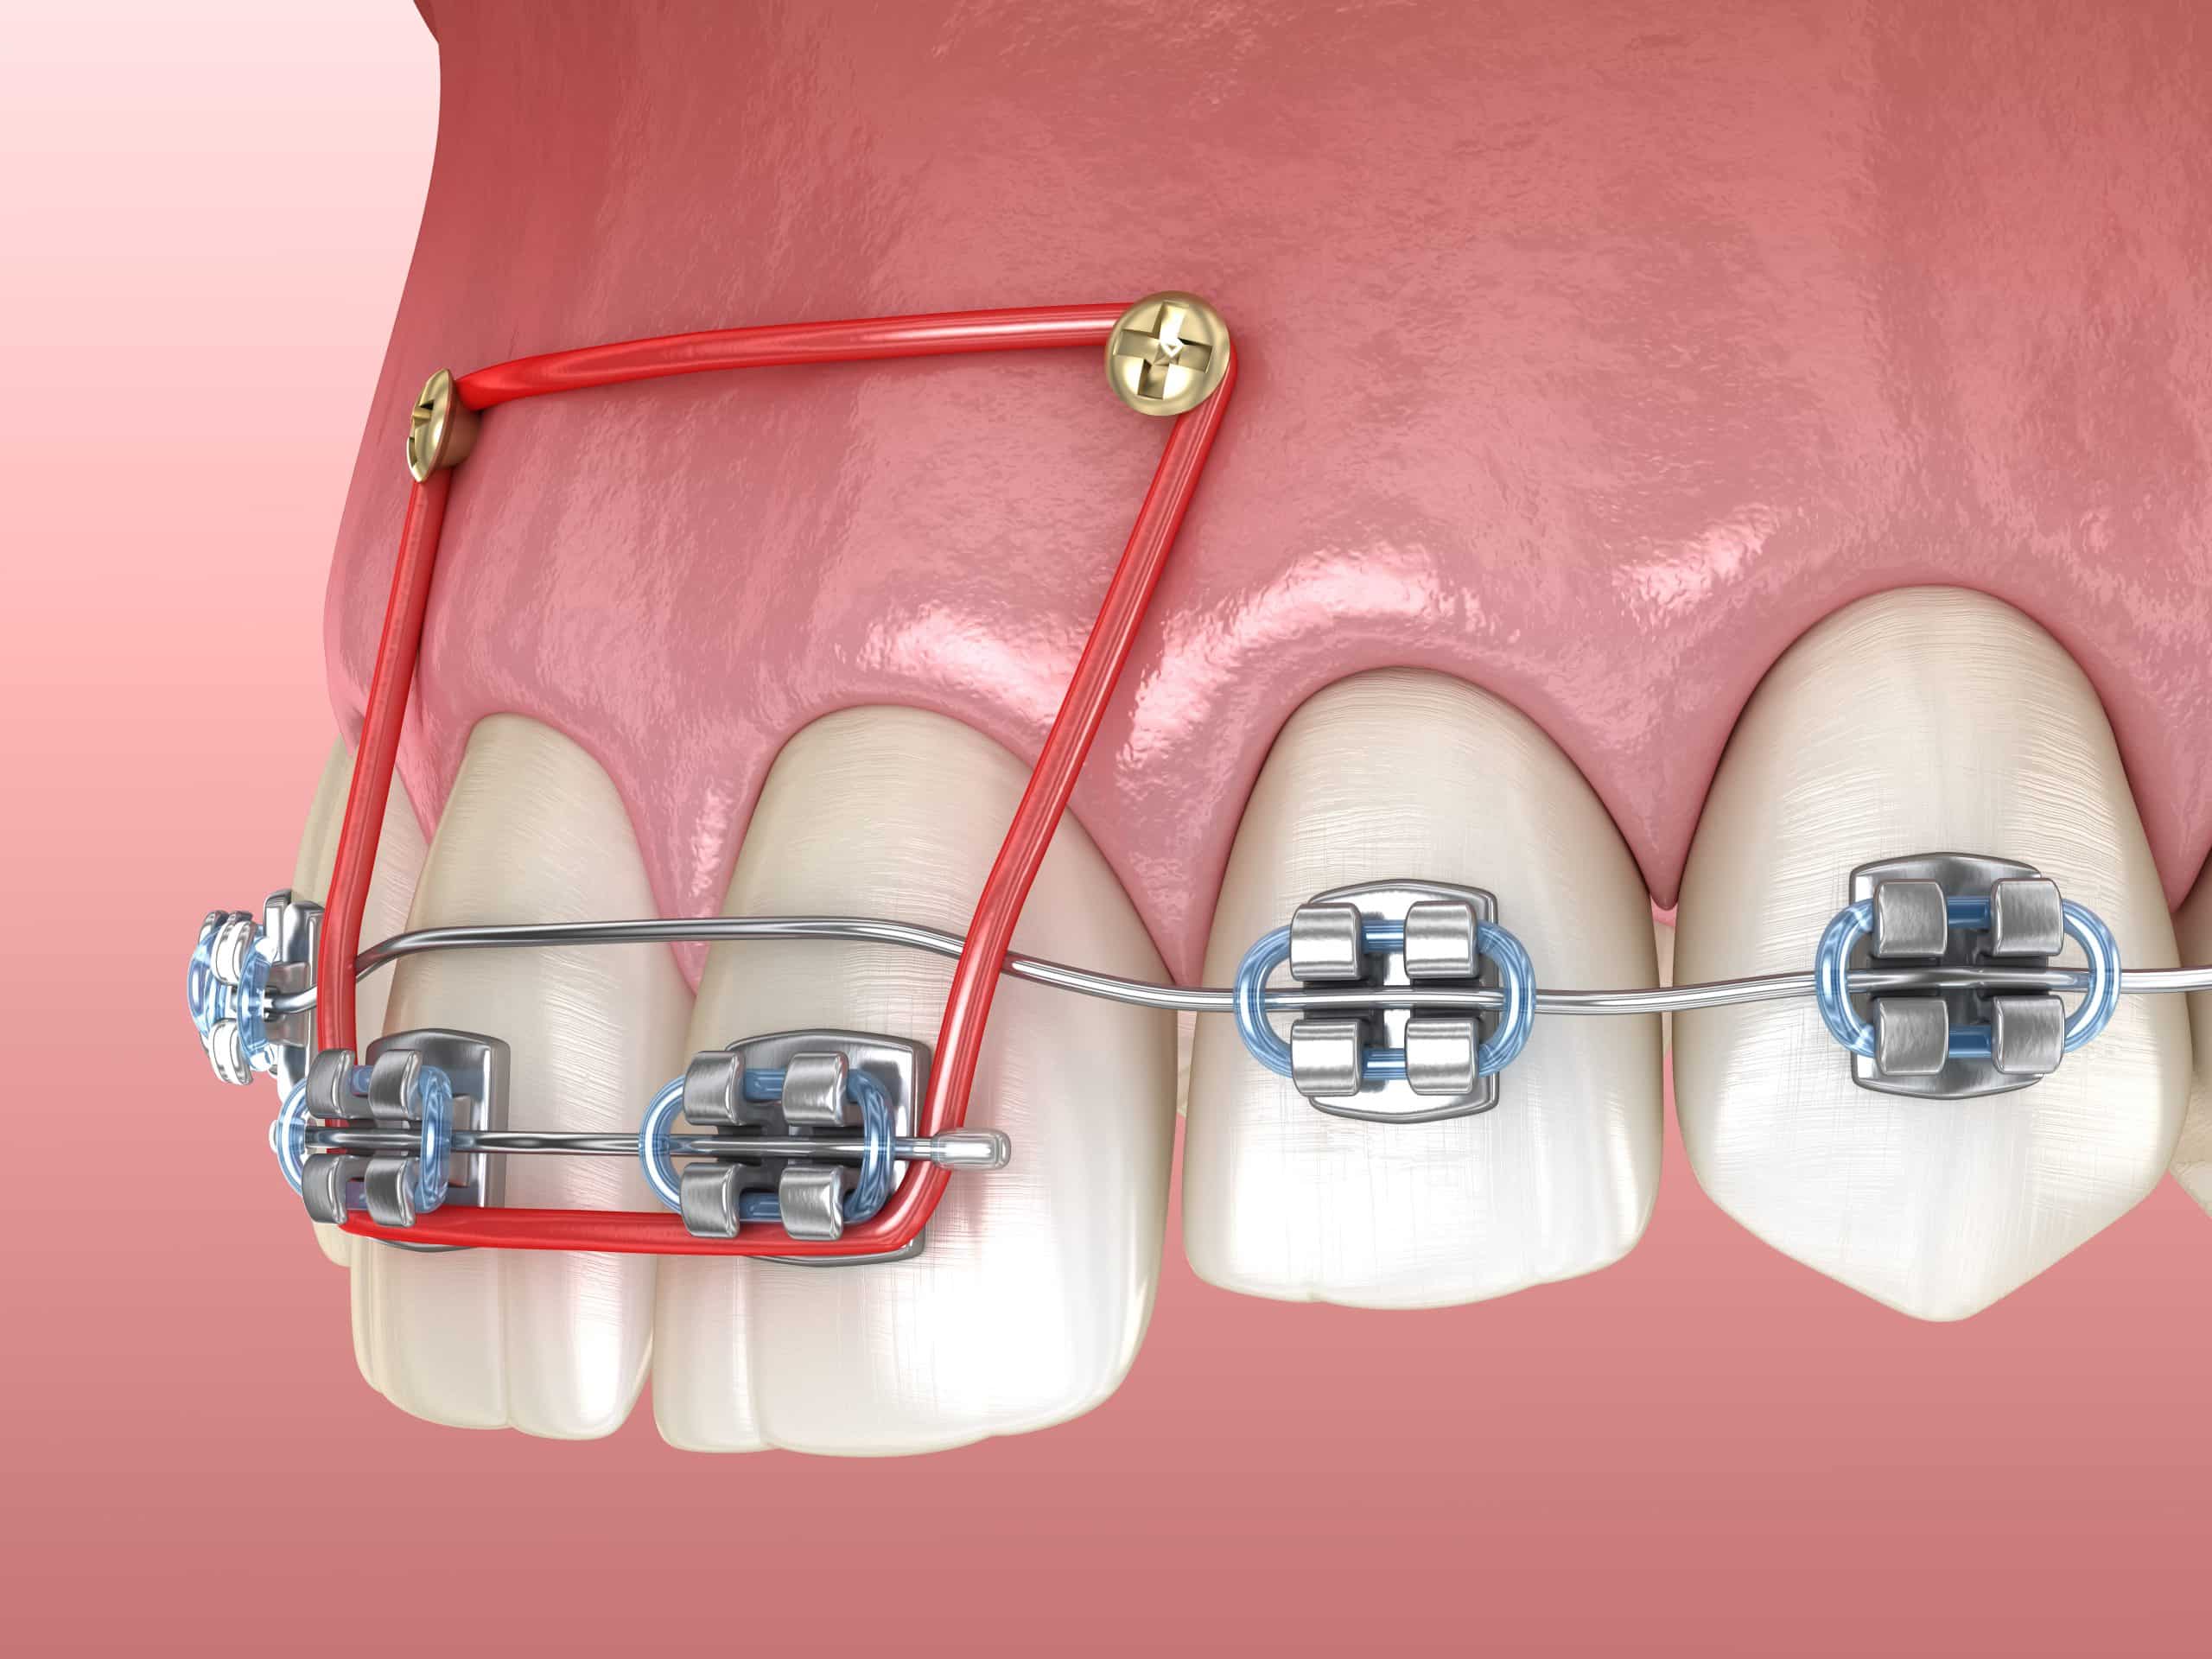 Orthodontic treatment can improve the alignment